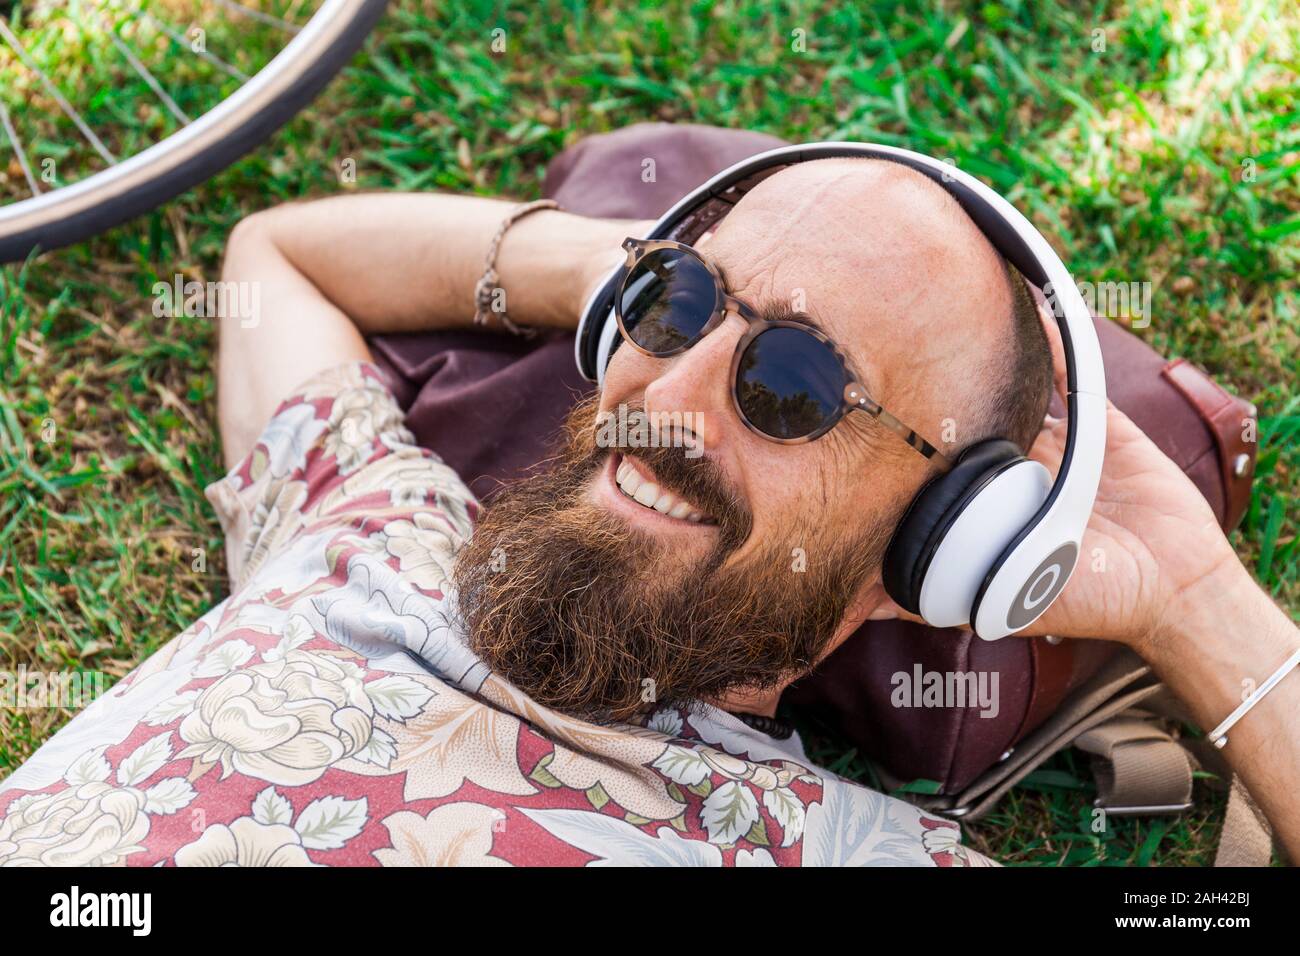 Mature man with red basecap, sunglasses and white headphones Stock Photo